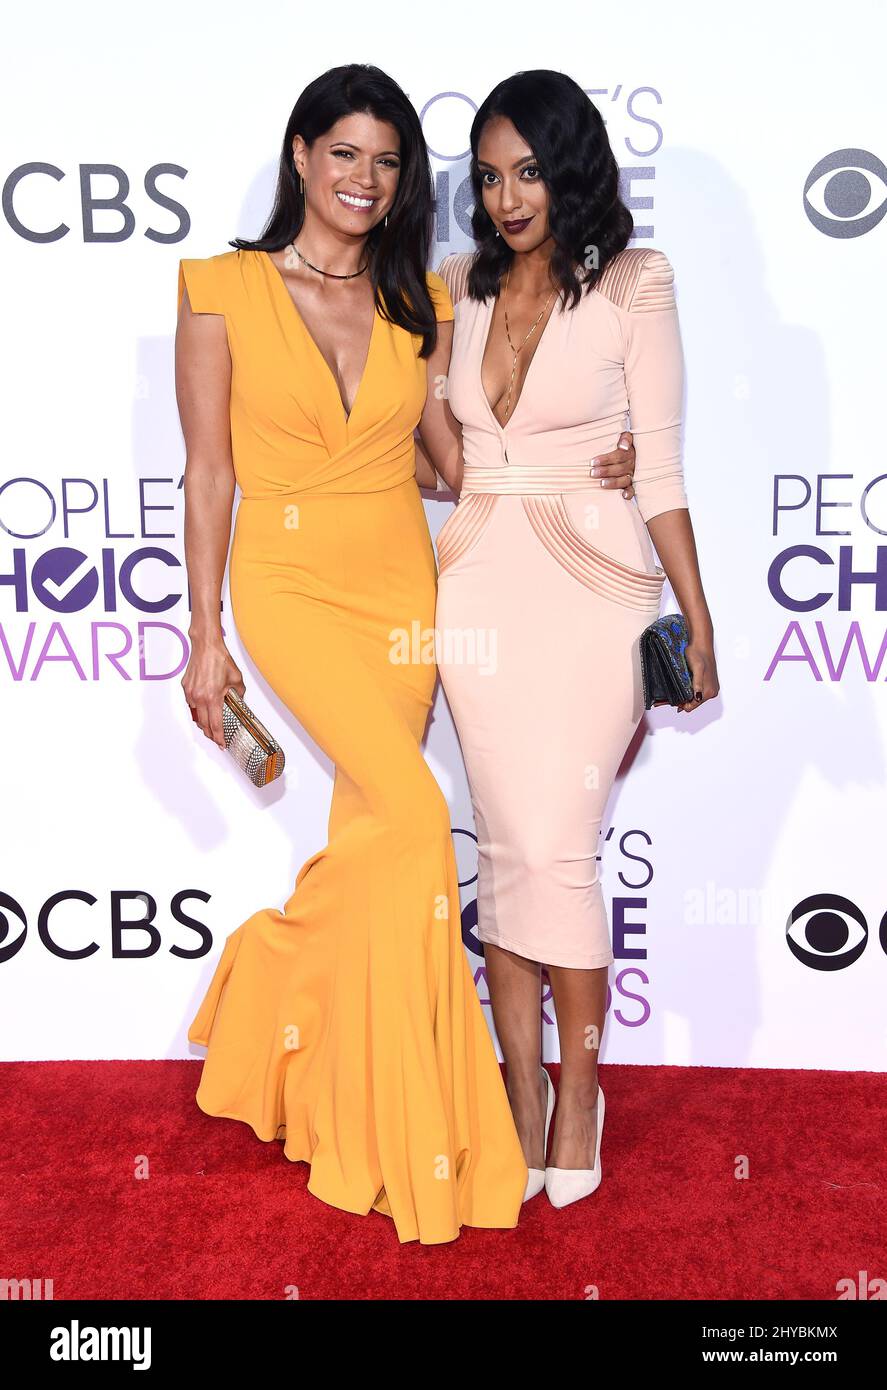 Andrea Navedo und Azie Tesfai nehmen an den People's Choice Awards 2017 im Microsoft Theater L.A. Teil Live in LSO Angeles, USA Stockfoto